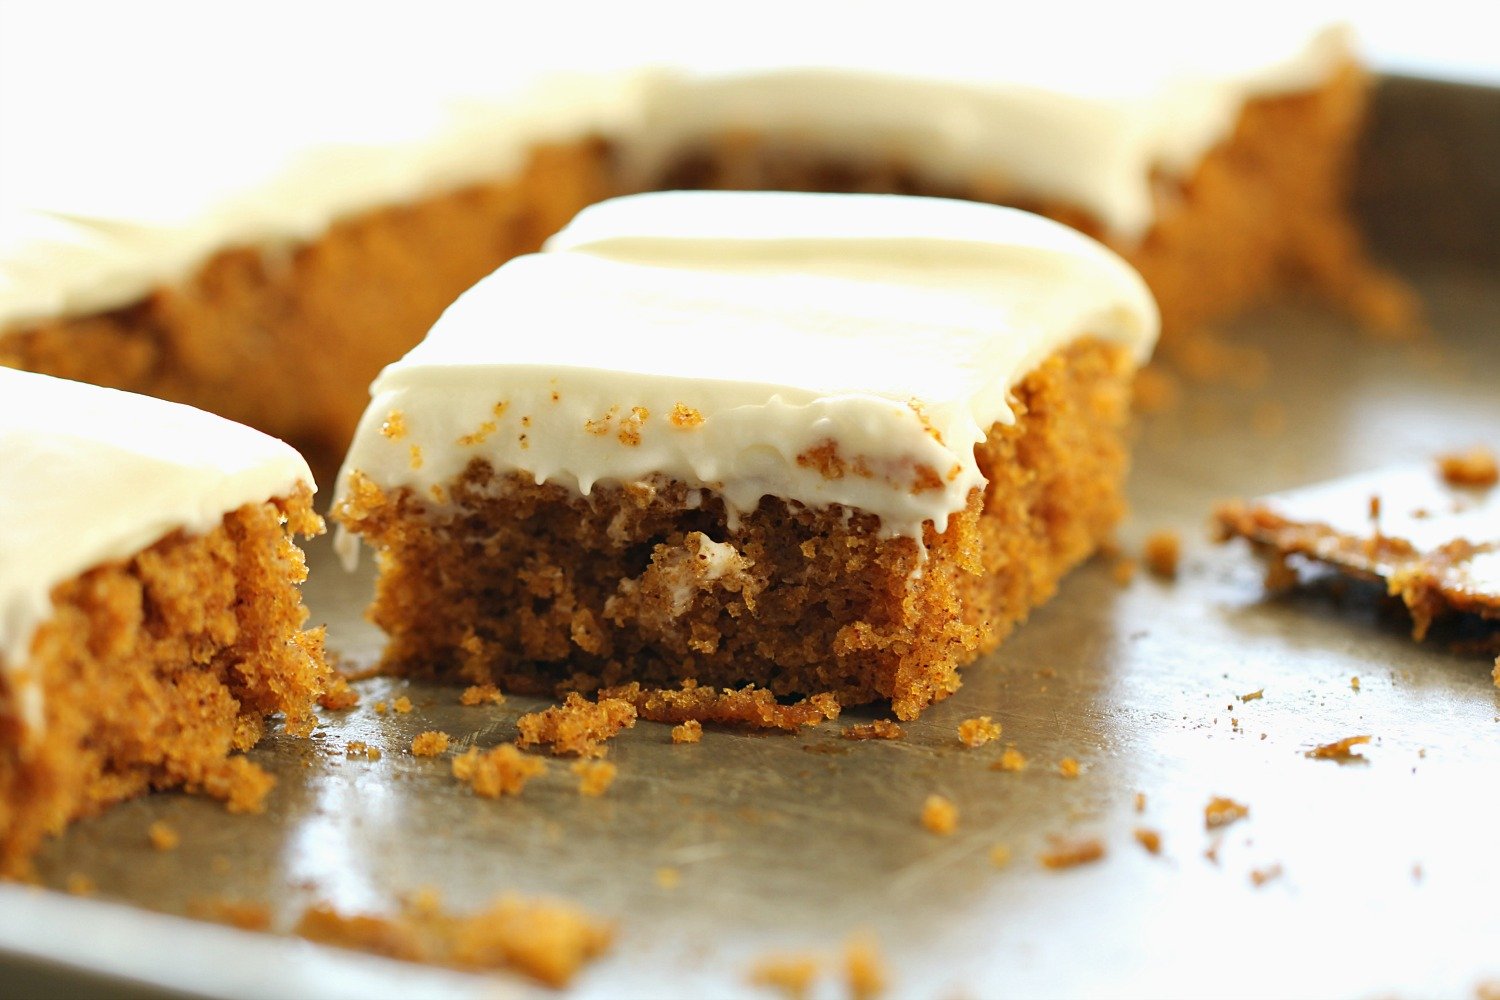 Slice of Sheet Pan Carrot Cake with cream cheese frosting